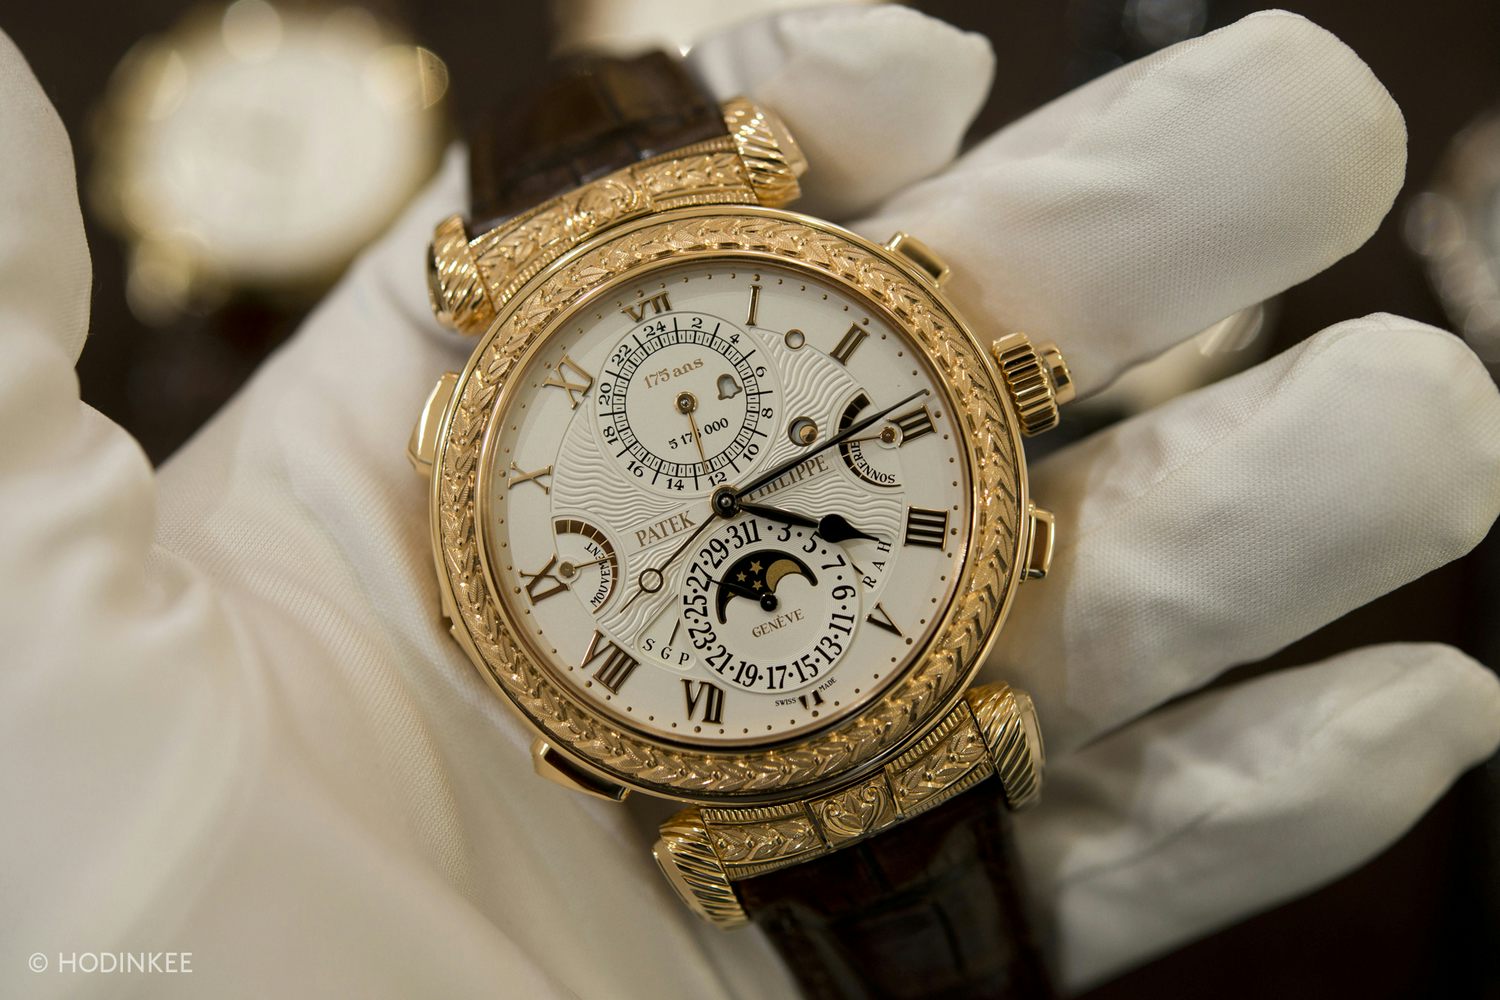 We do things well, we didn't know it was luxury: 175 years of